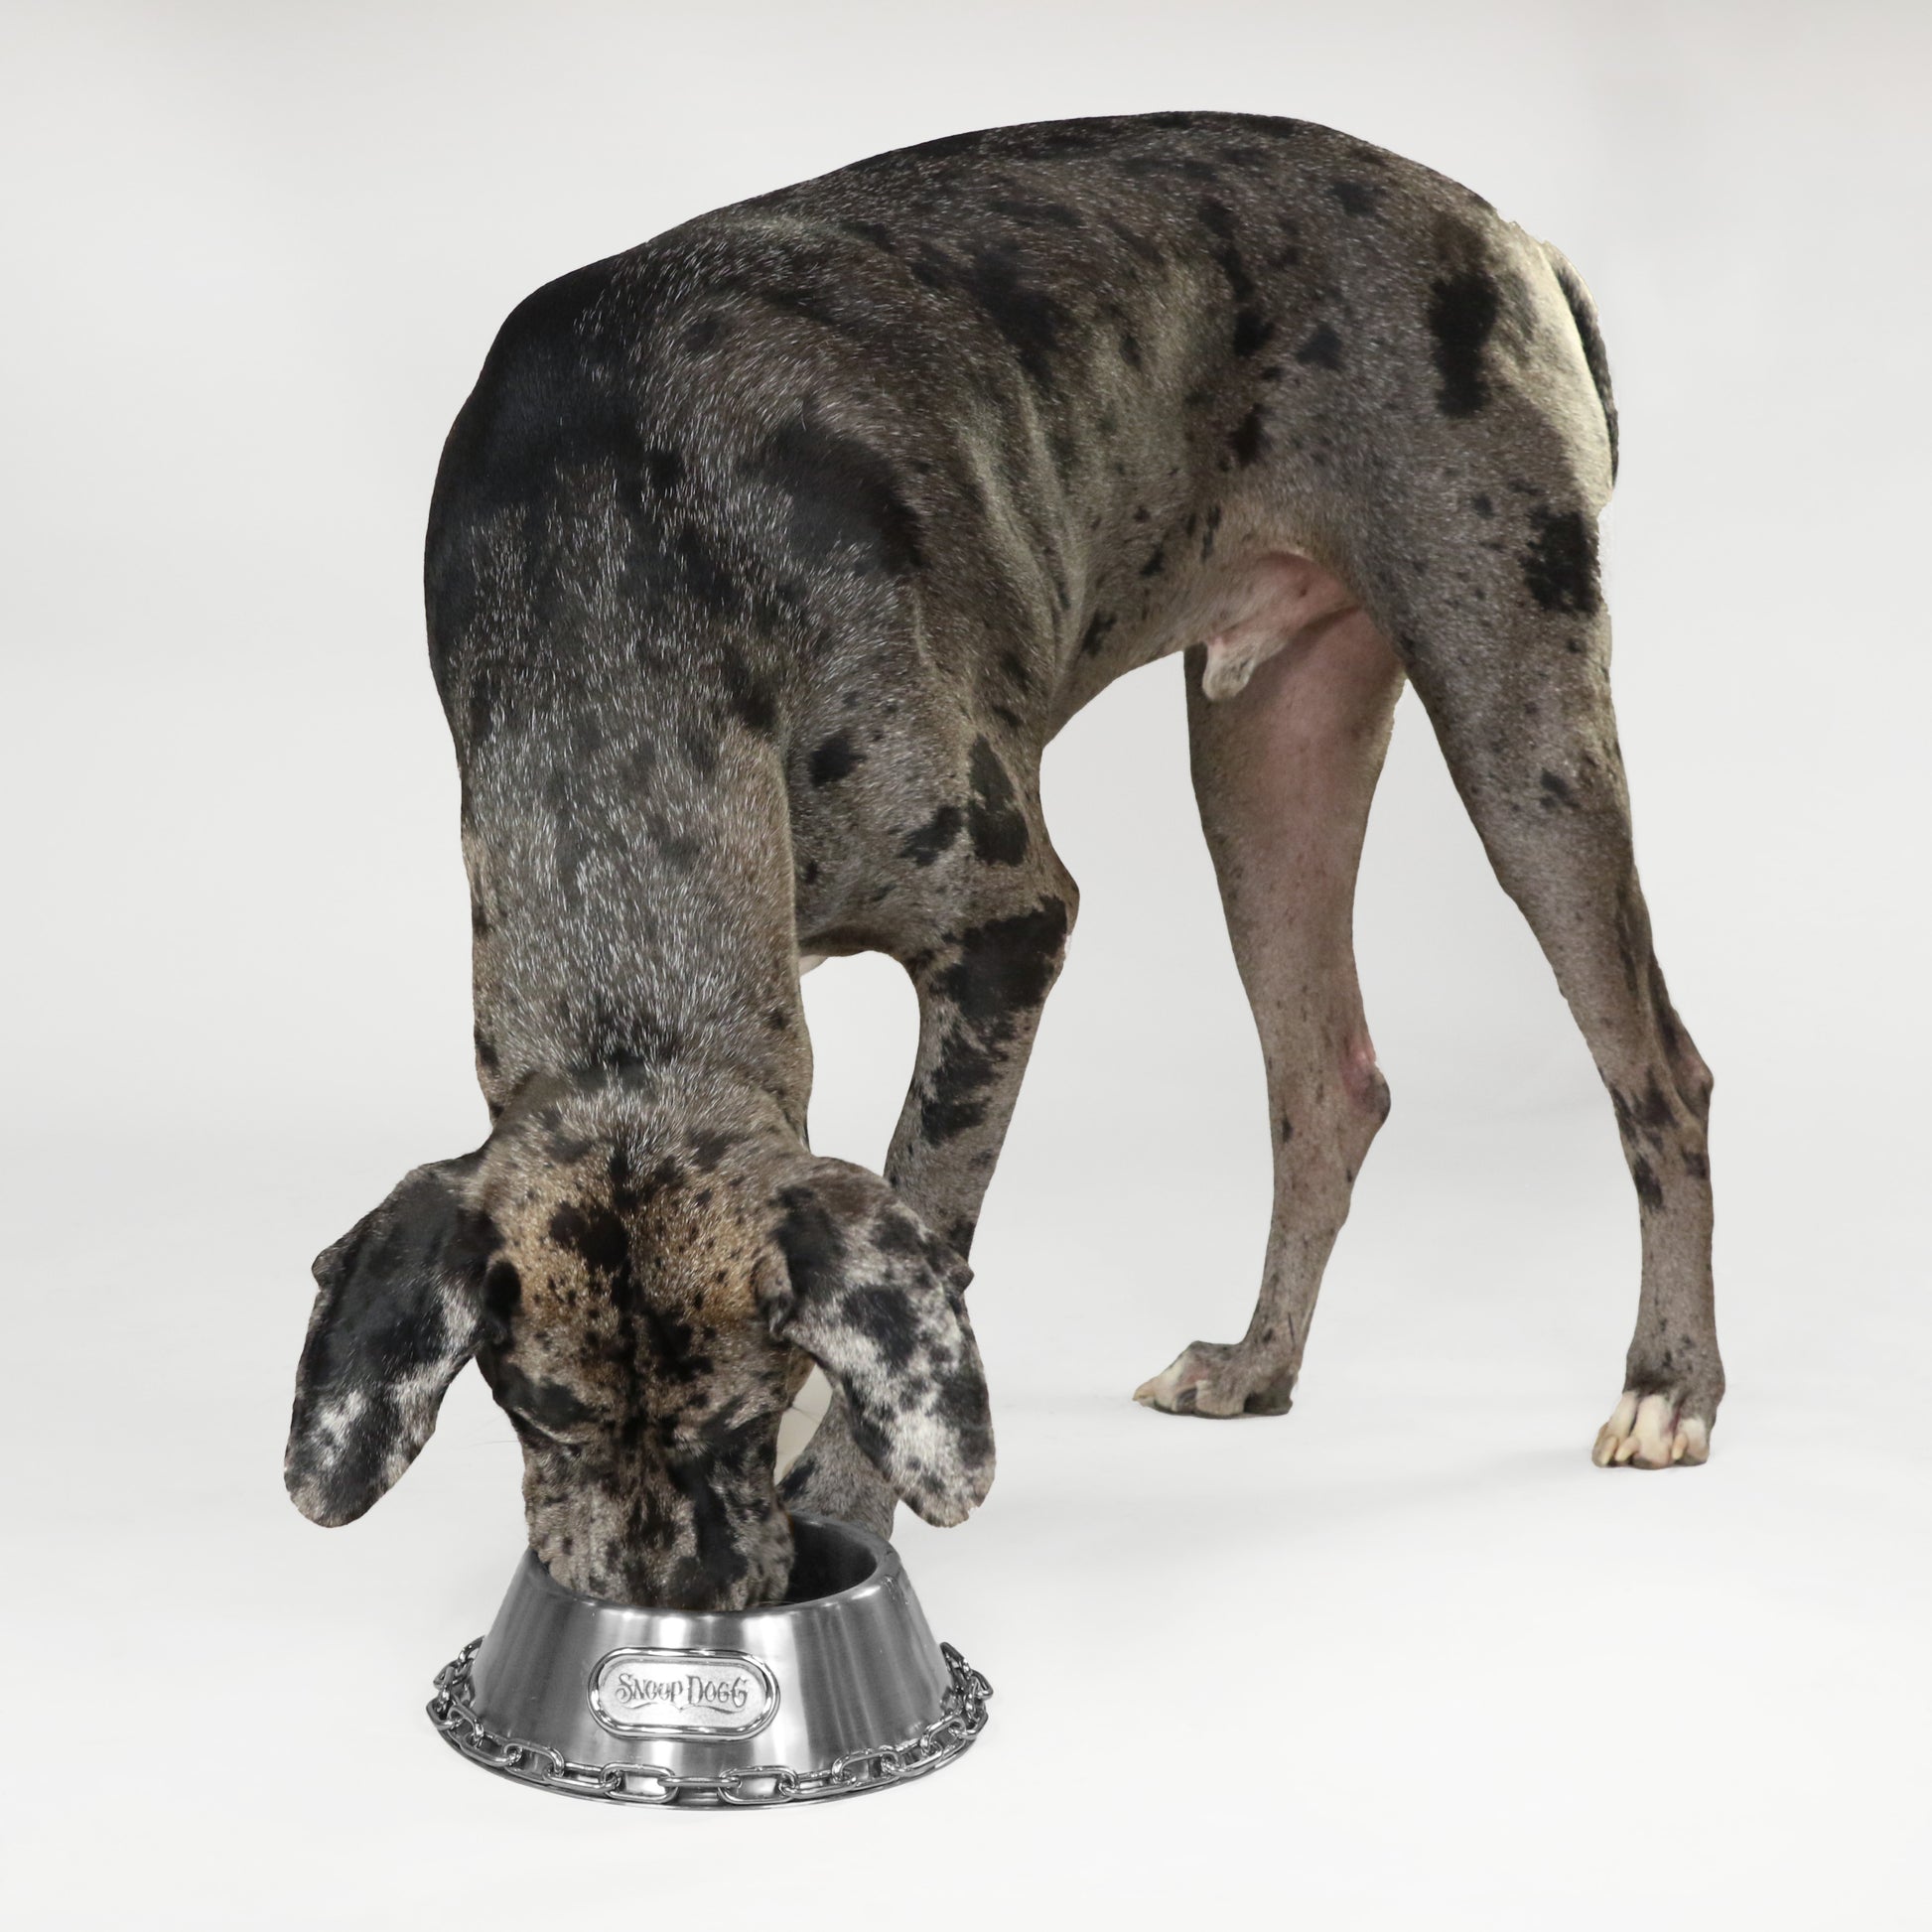 Rookie the Great Dane eating out of the Large Deluxe Silver Pet Bowl.